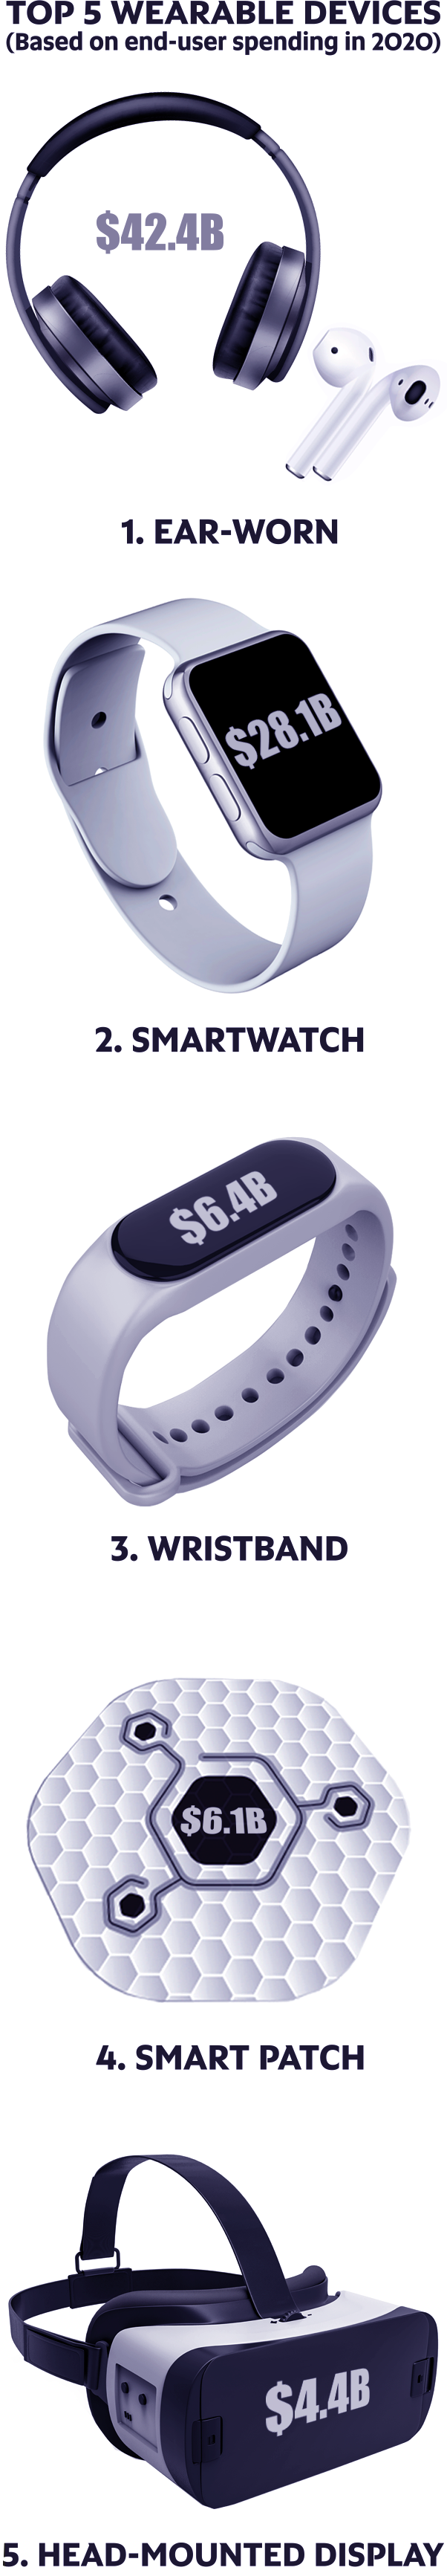 Top 5 wearable devices